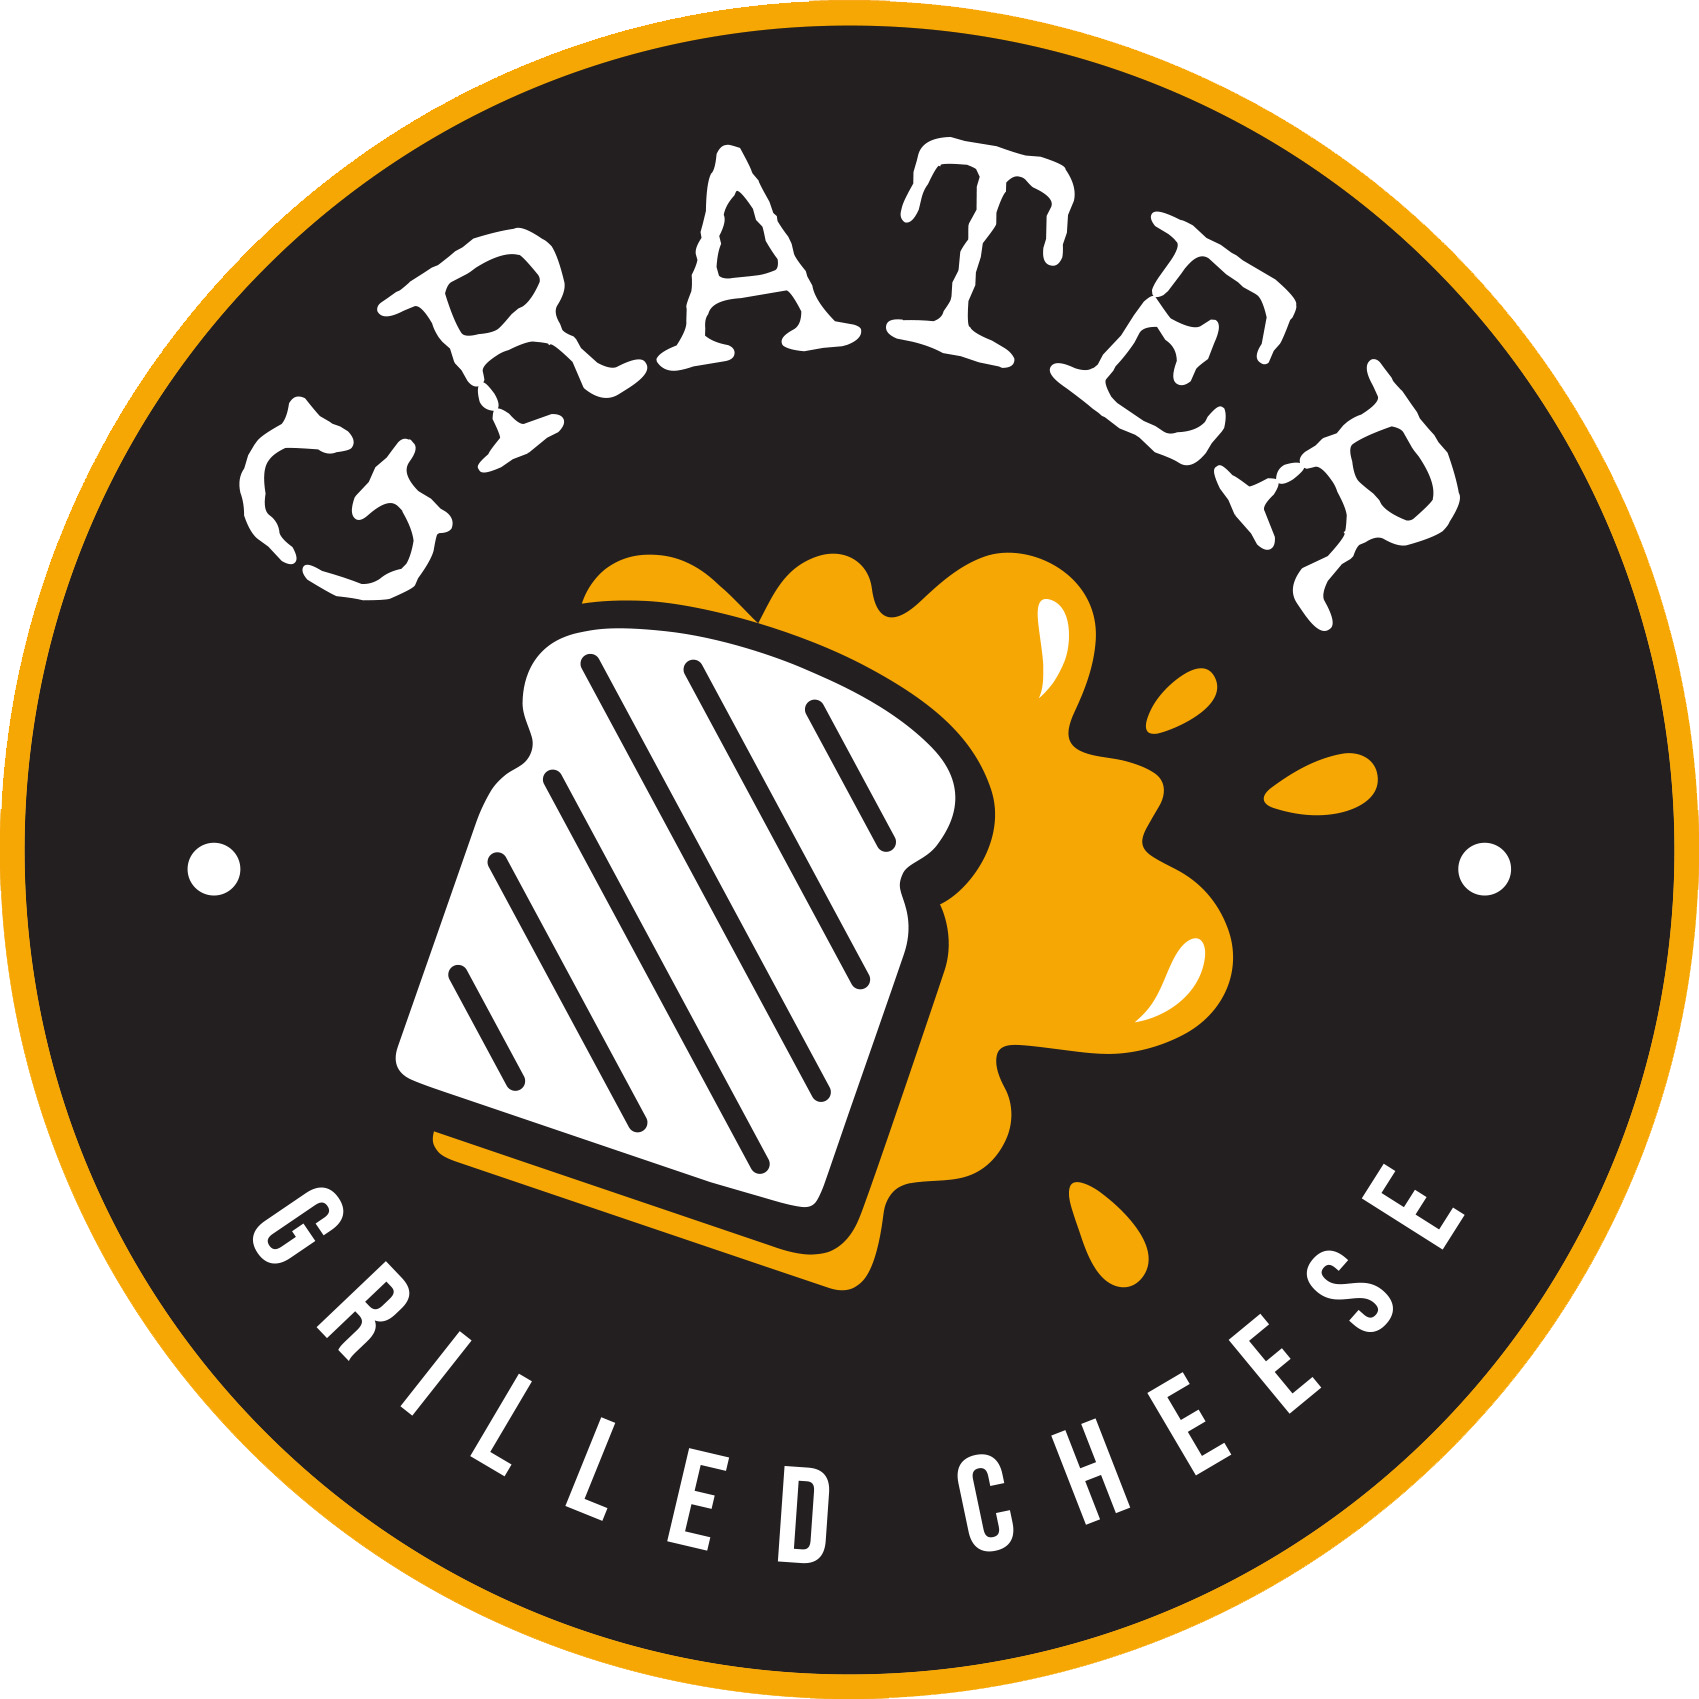 Grater Grilled Cheese